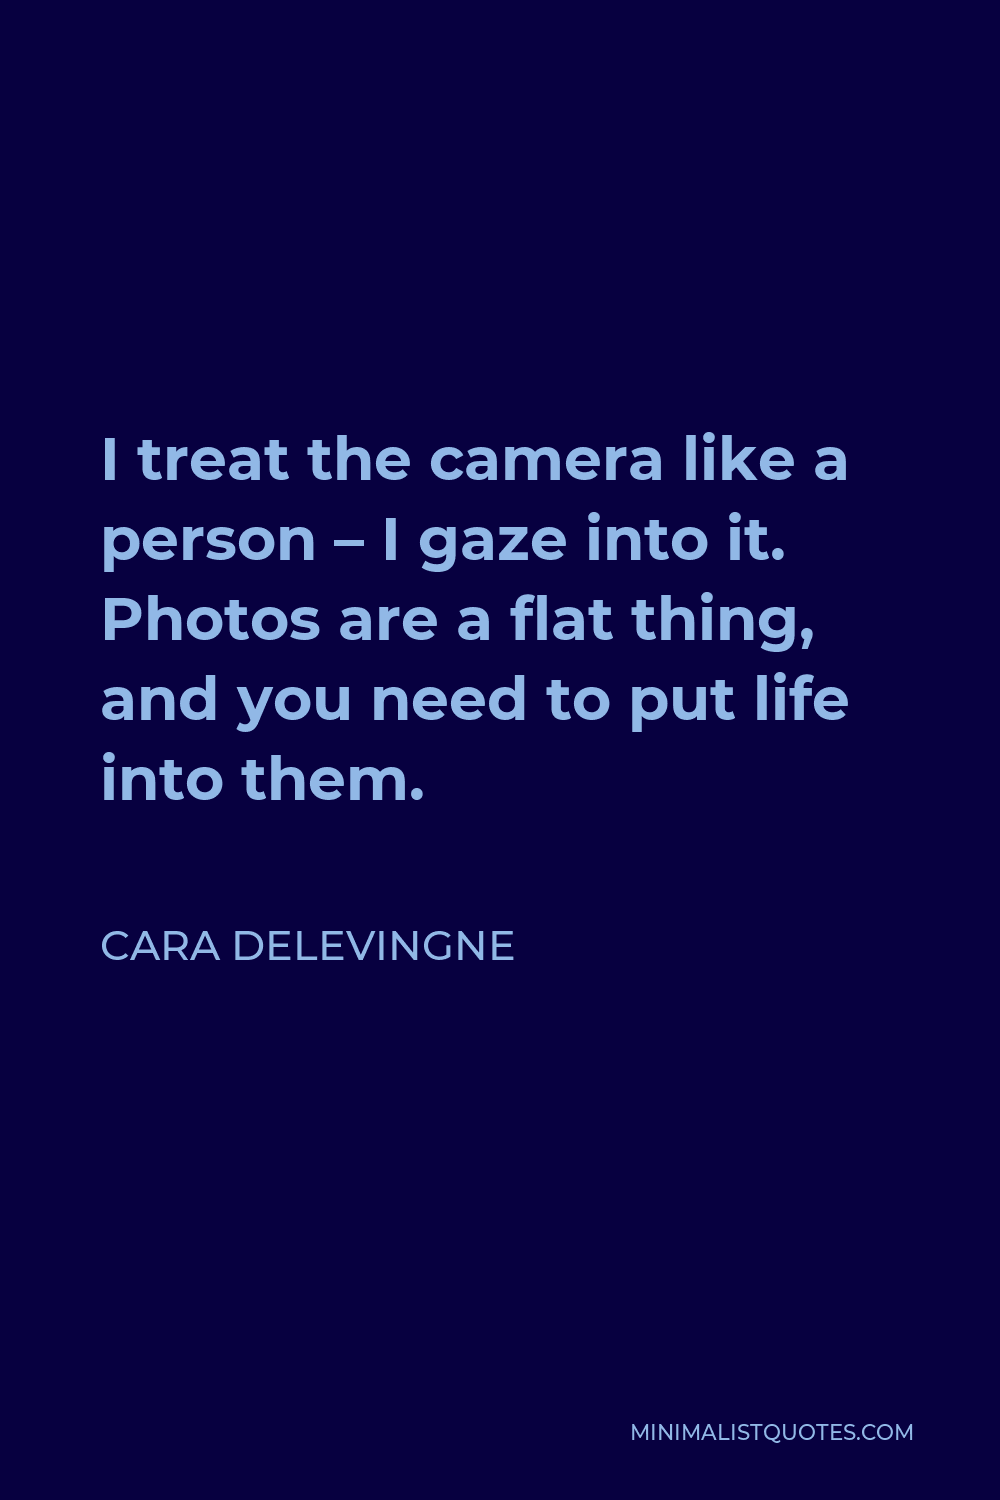 Cara Delevingne Quote - I treat the camera like a person – I gaze into it. Photos are a flat thing, and you need to put life into them.